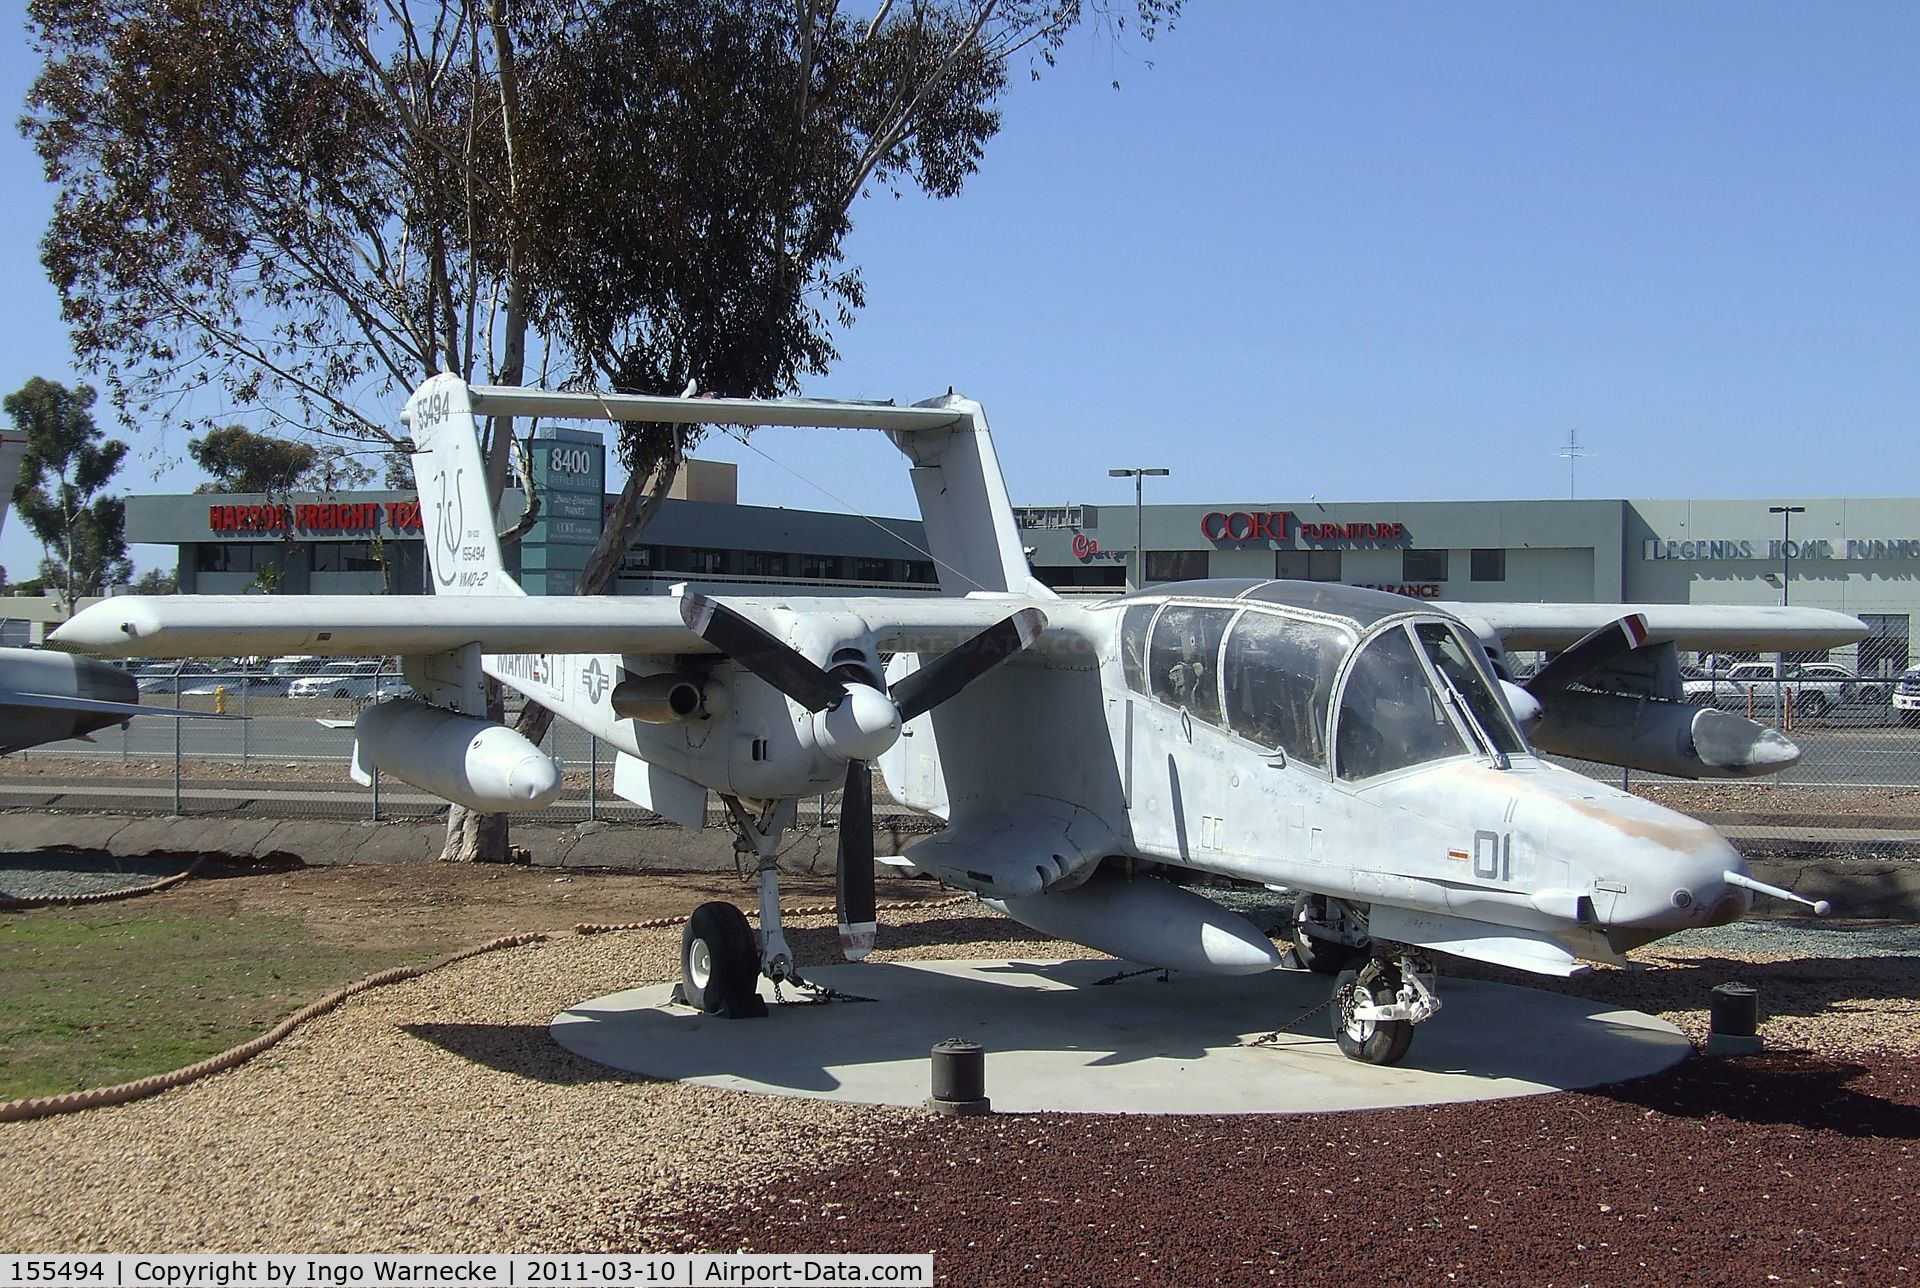 155494, 1968 North American Rockwell OV-10D Bronco C/N 305-105, North American OV-10D Bronco at the Flying Leatherneck Aviation Museum, Miramar CA